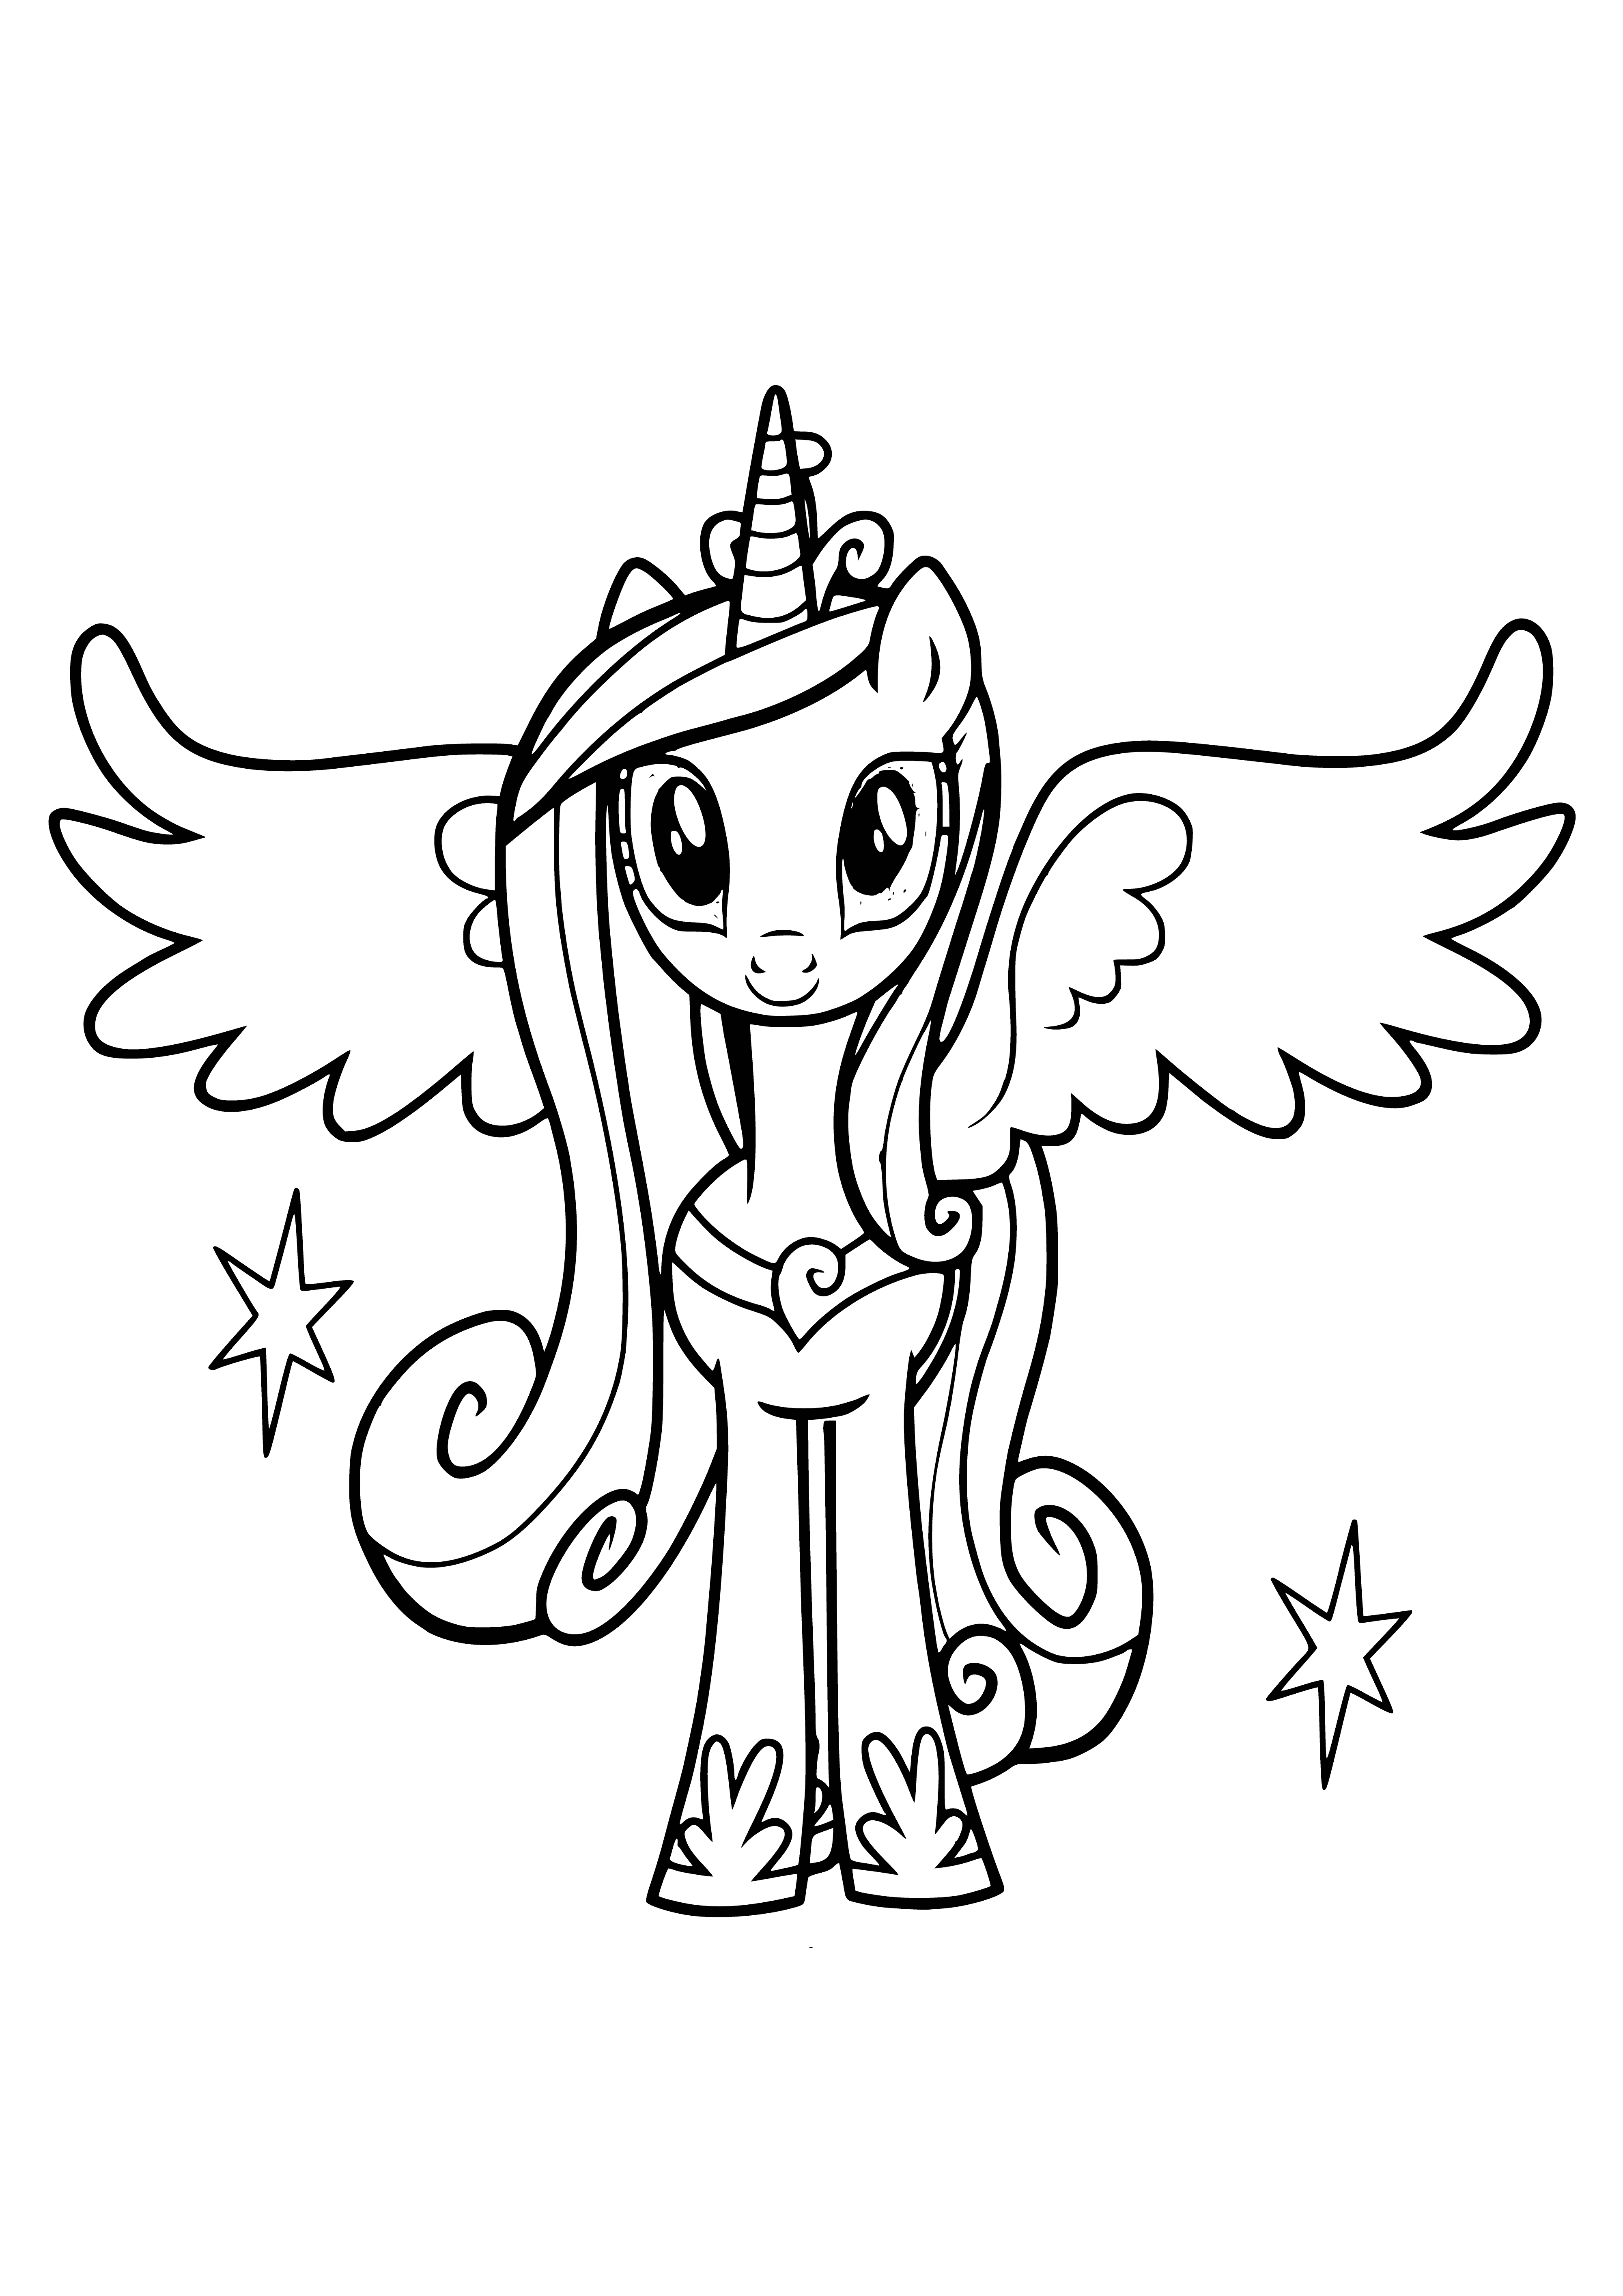 coloring page: A magenta alicorn pony with a white mane & tail, silver crown, pink heart, & blue eyes stands on a pink cloud.